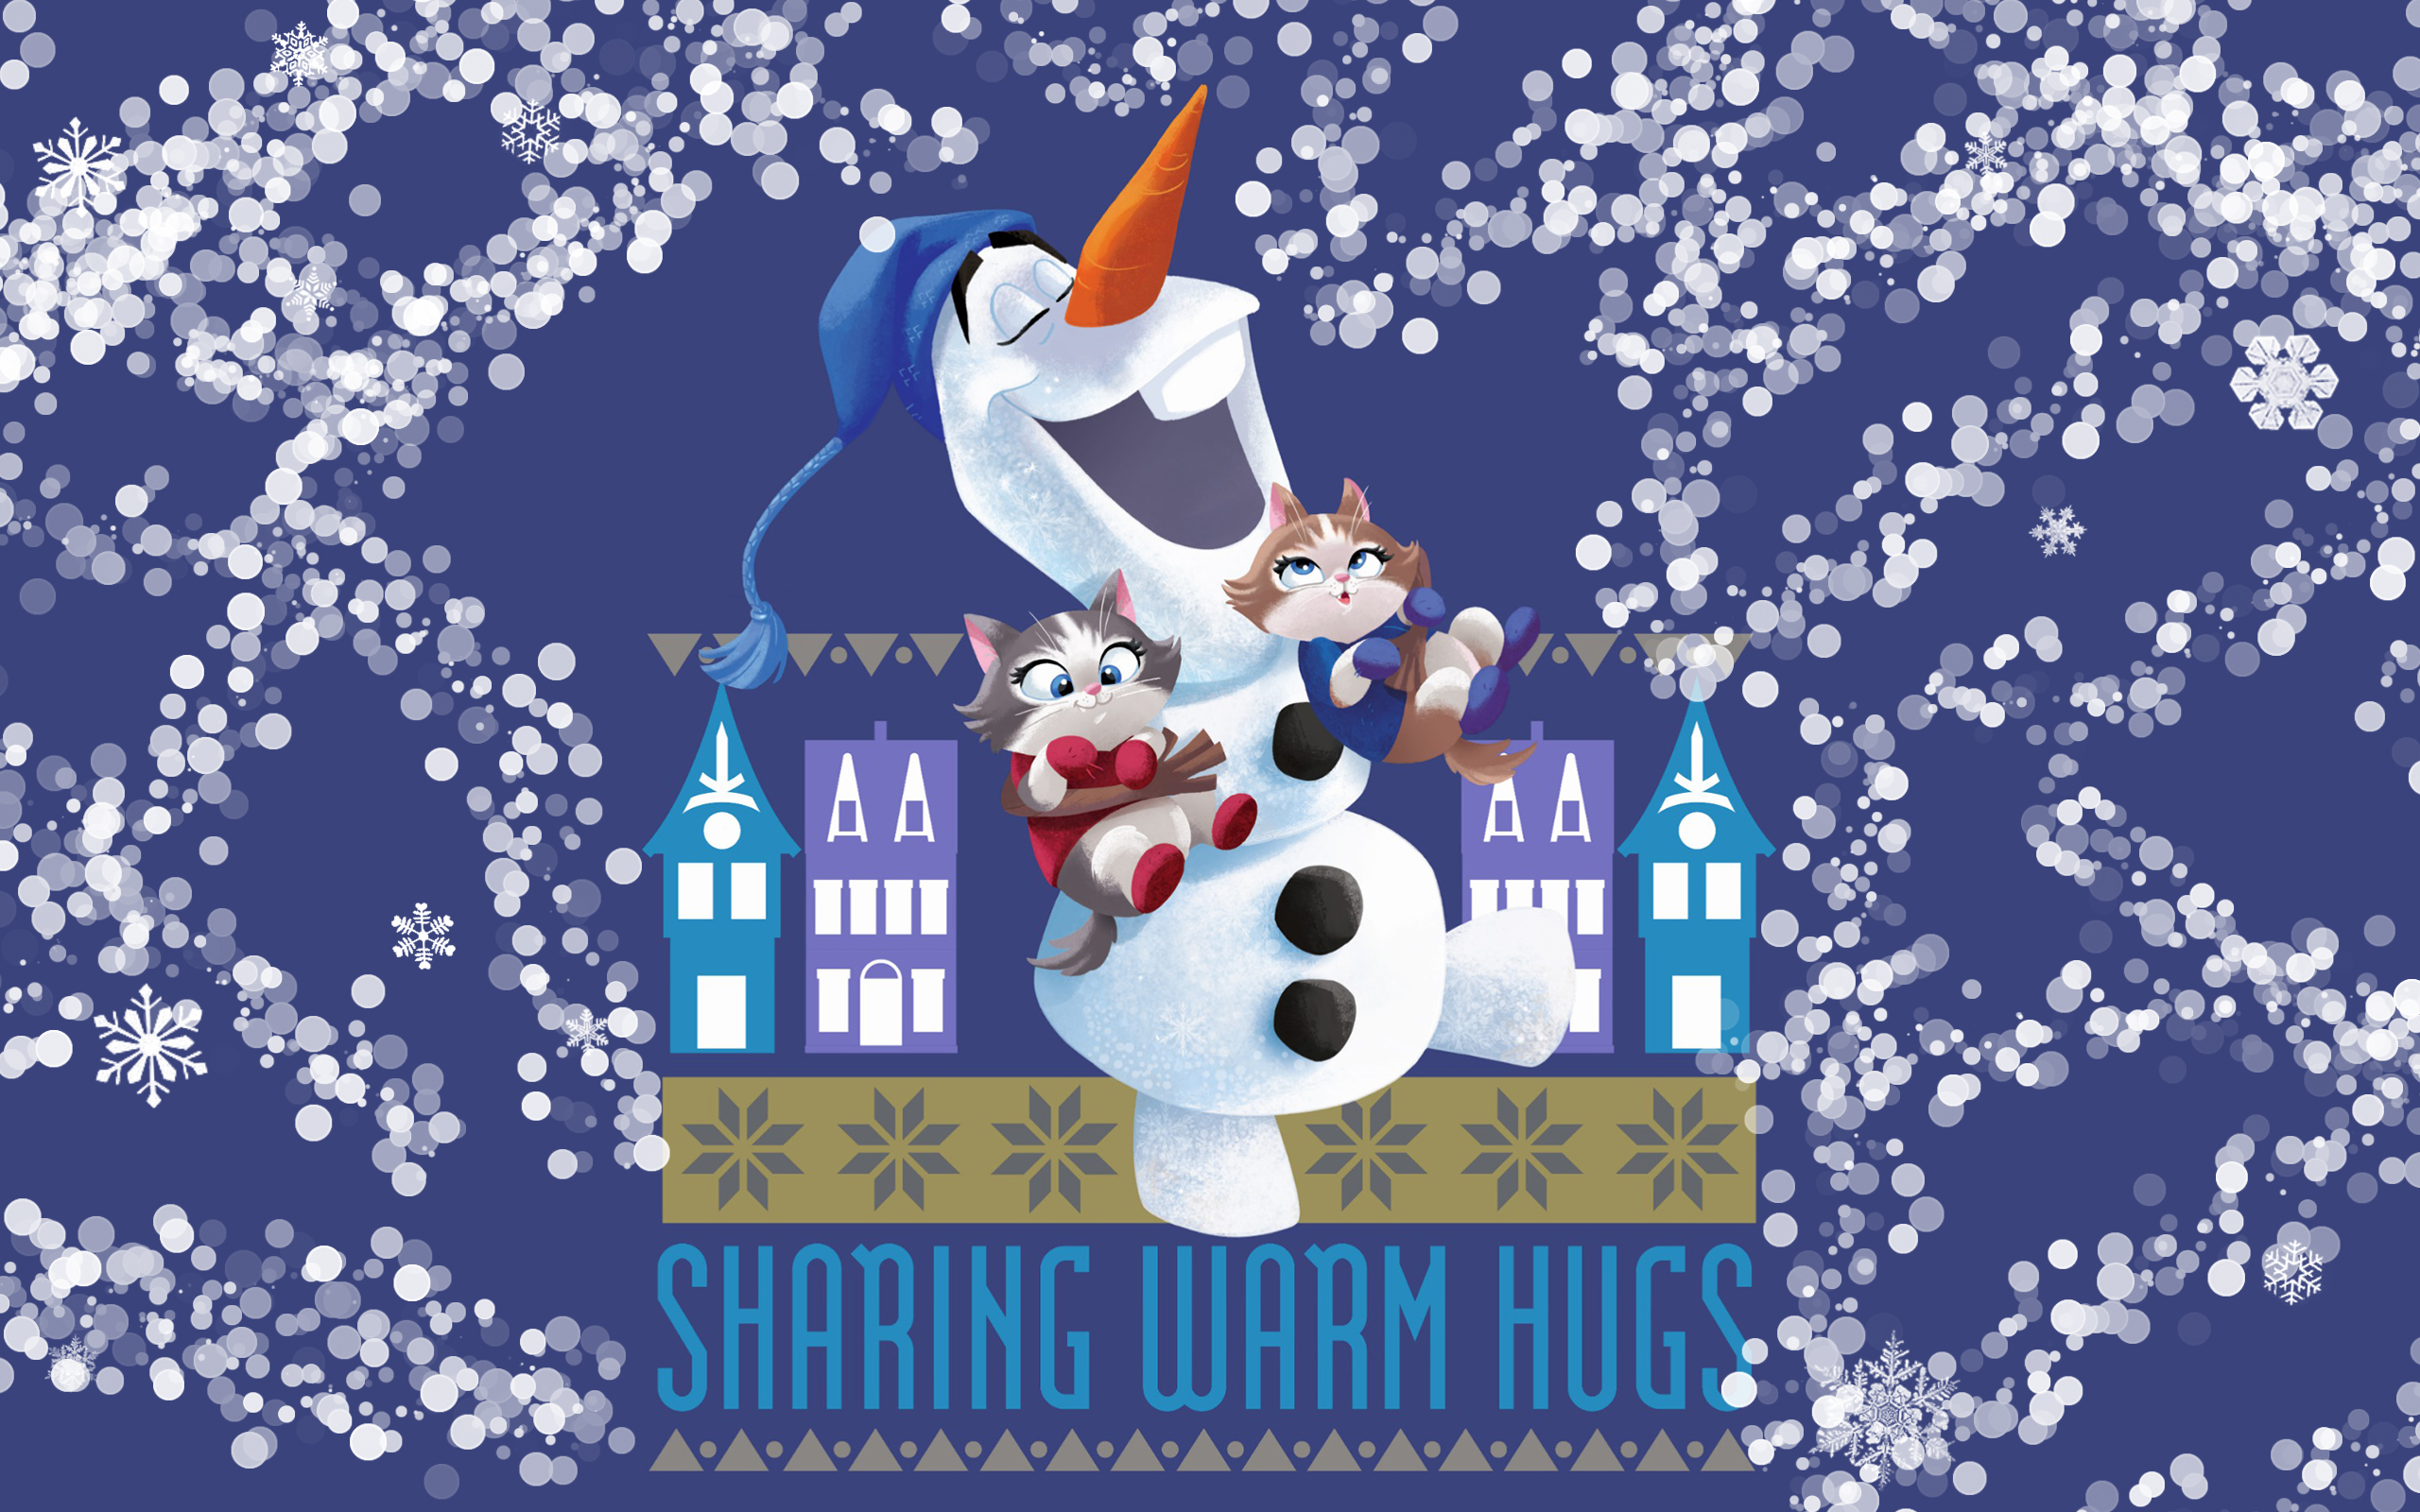 Olaf's Frozen Adventure new wallpapers for winter Holidays 